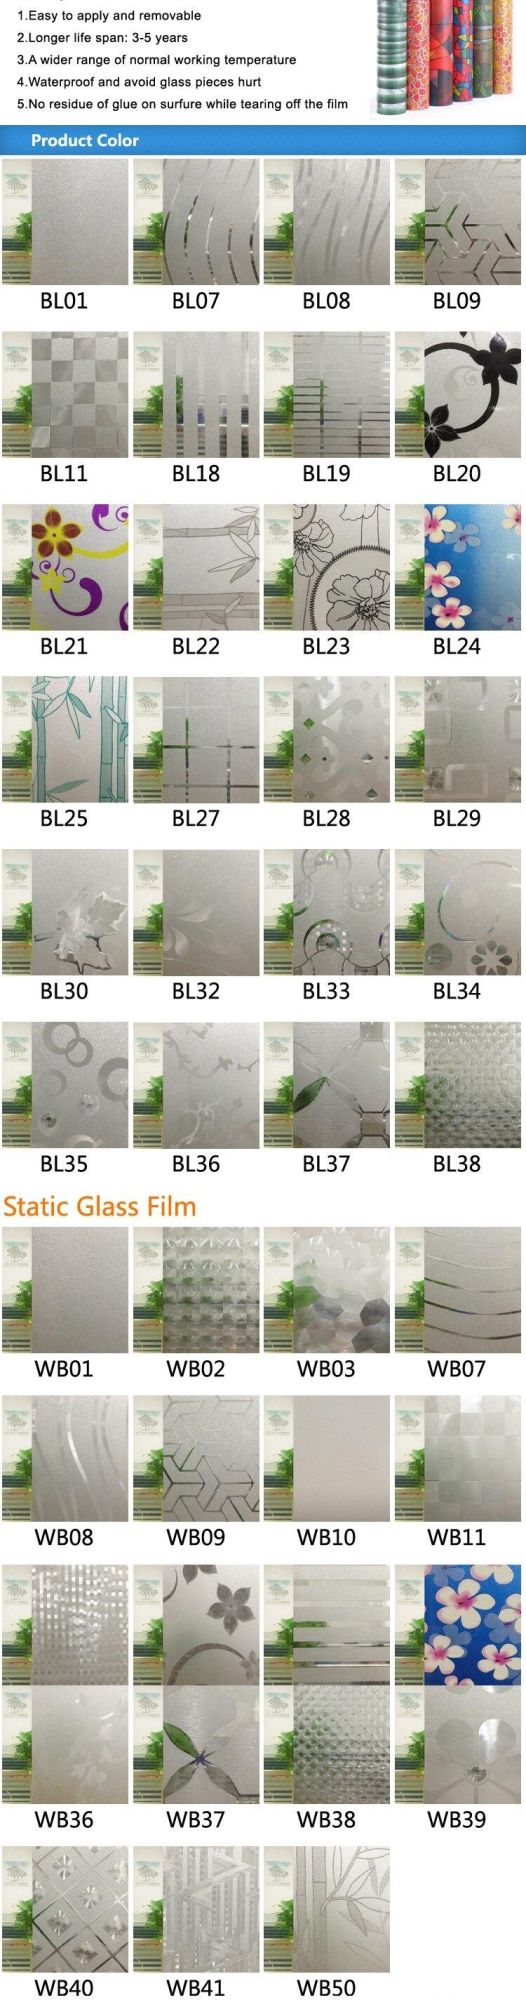 Gliiter Privacy Window Film Translucent Static Cling Sticker for Home Security and Decorative Opaque Vinyl Glass Effect